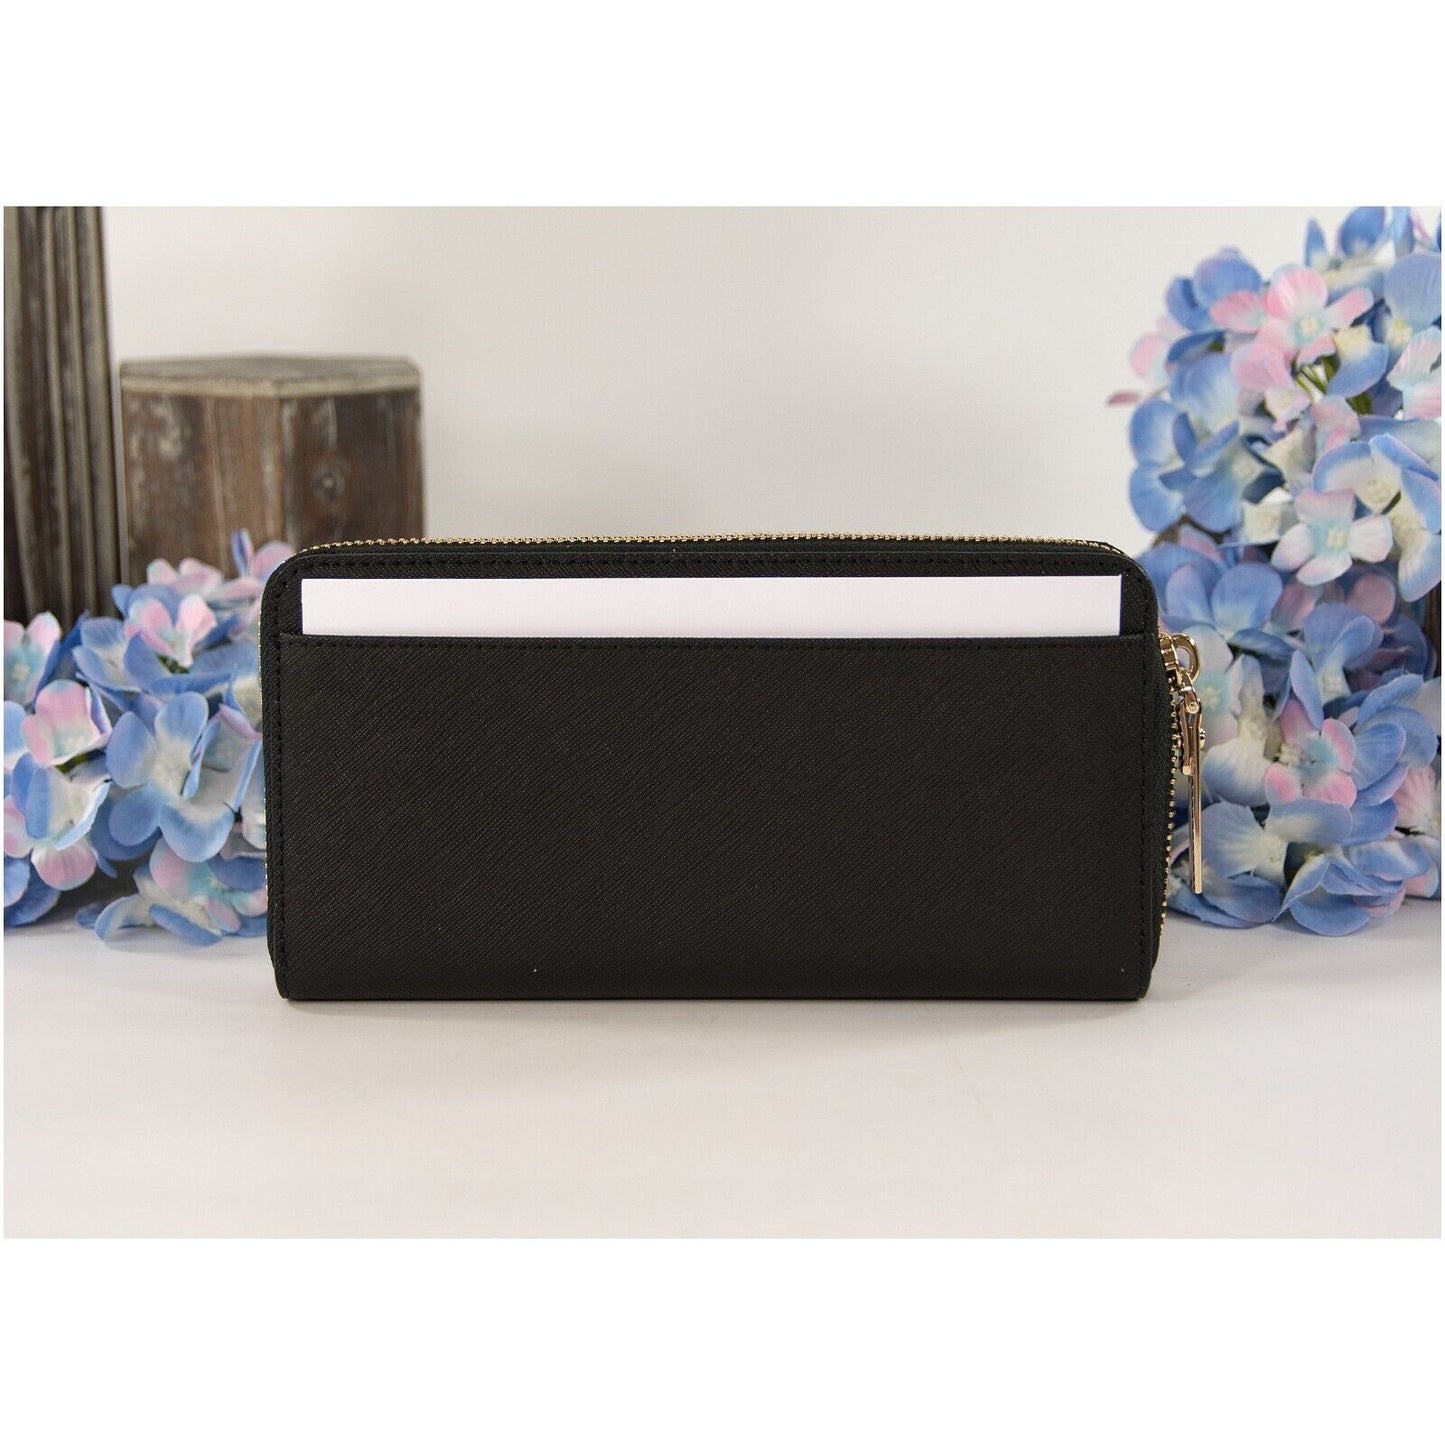 Kate Spade Black Leather Cameron Street Zip Around Lacey Wallet NWT